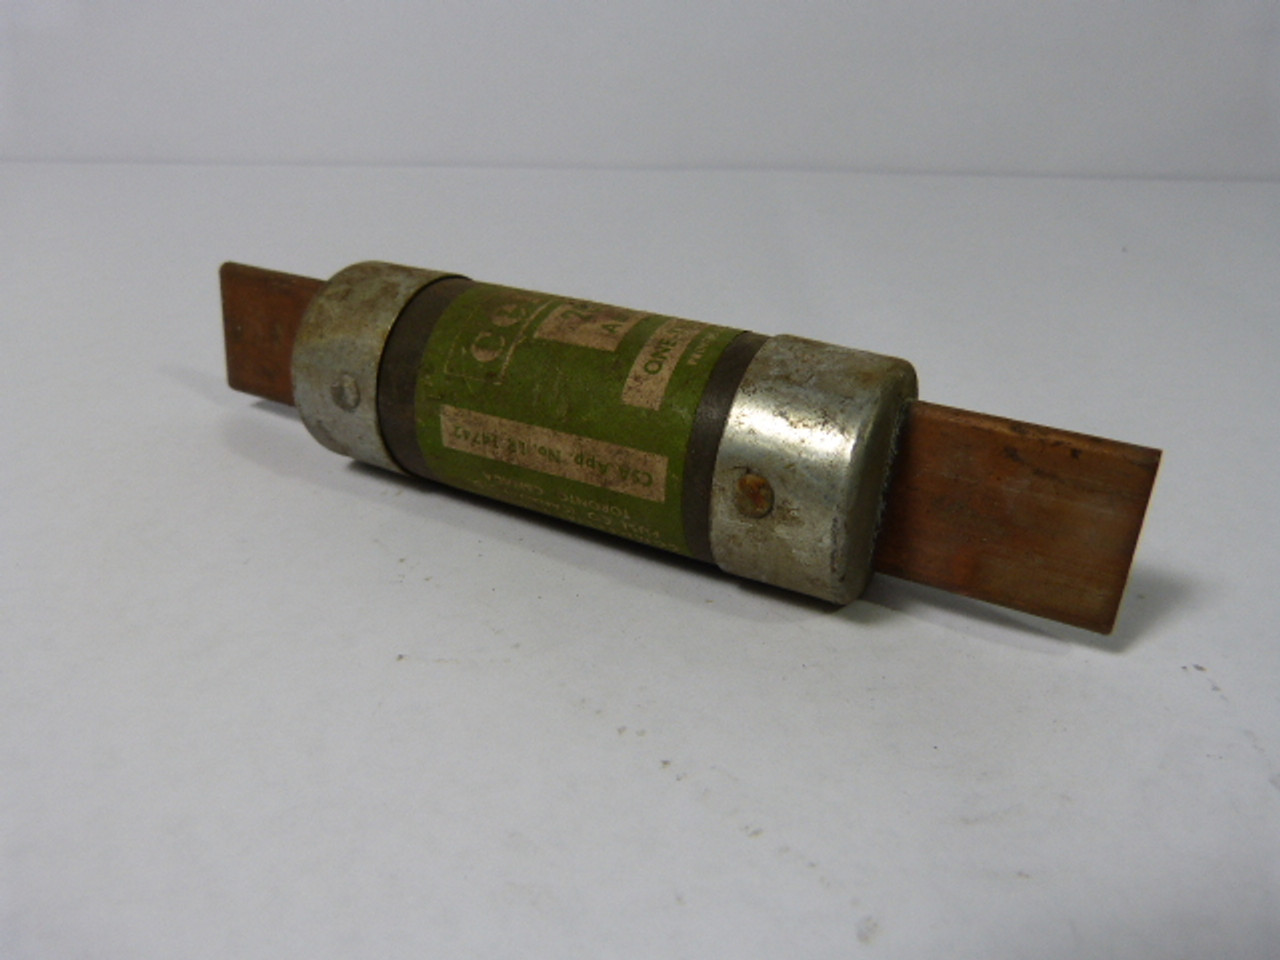 Cefco OT-200 One Time Fuse 200A 250V USED